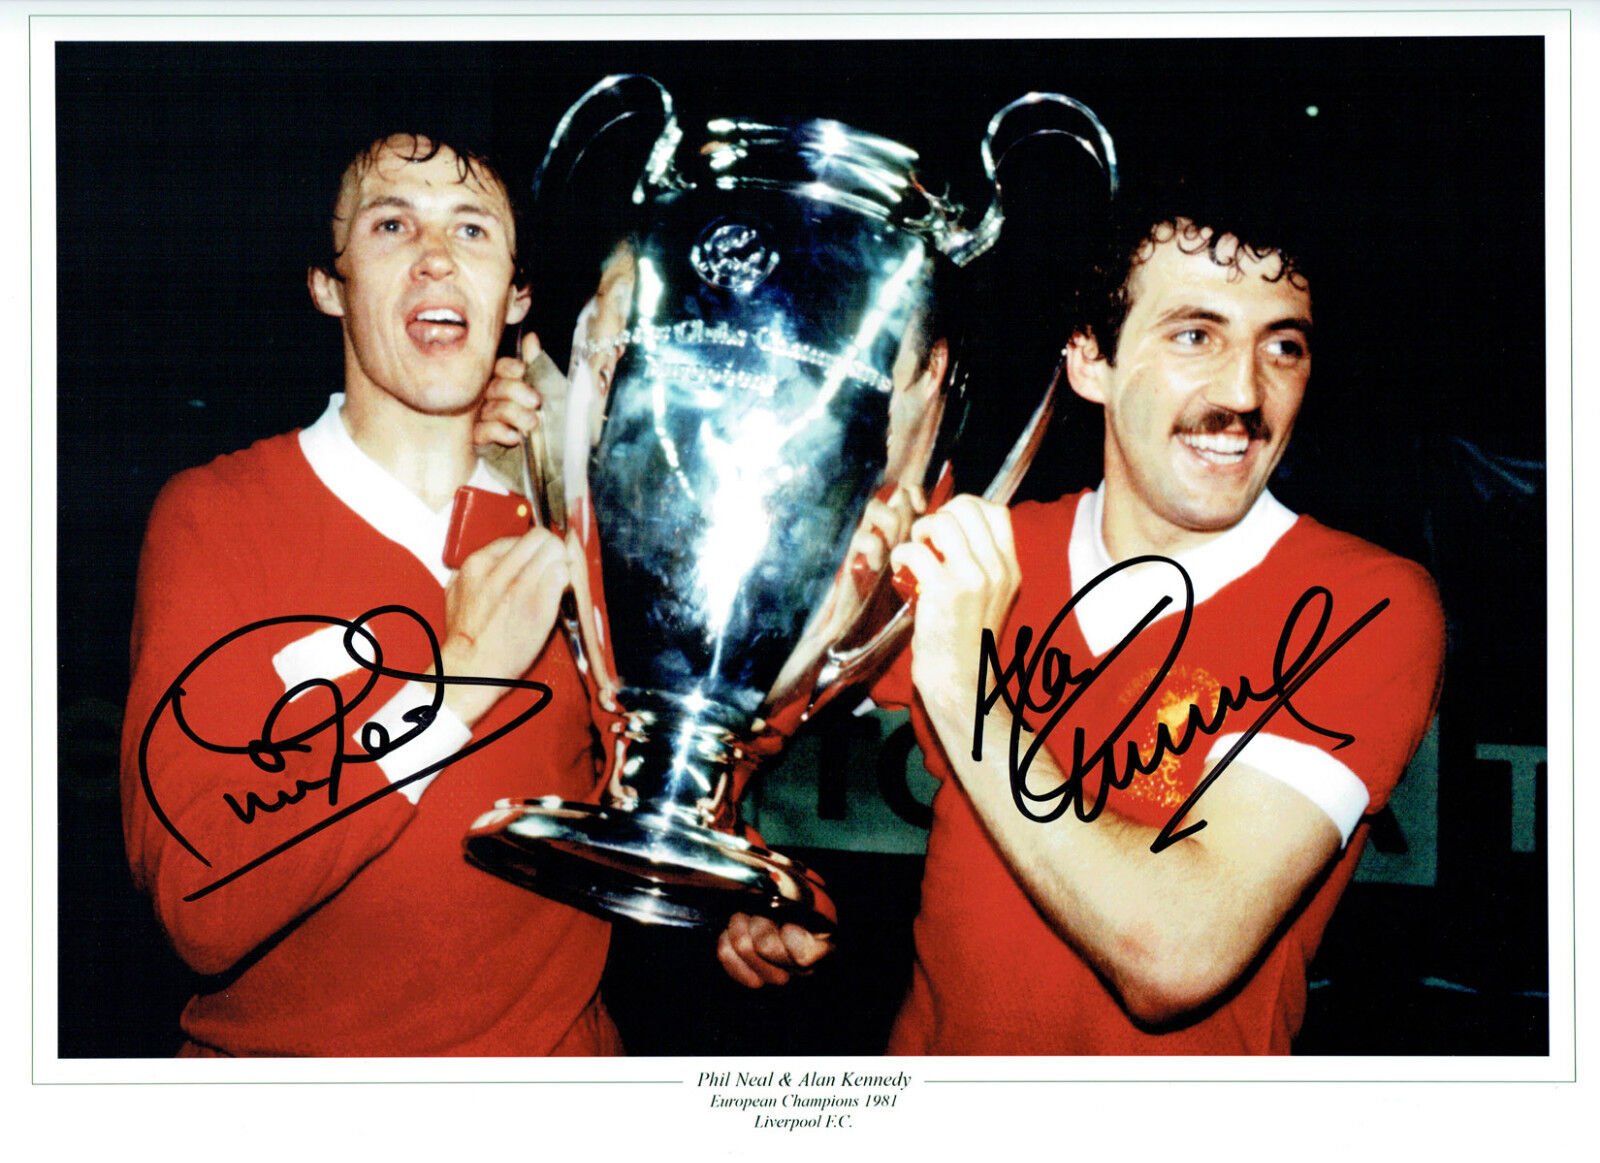 Phil NEAL & Alan KENNEDY Signed Liverpool Autograph 16x12 Photo Poster painting AFTAL COA